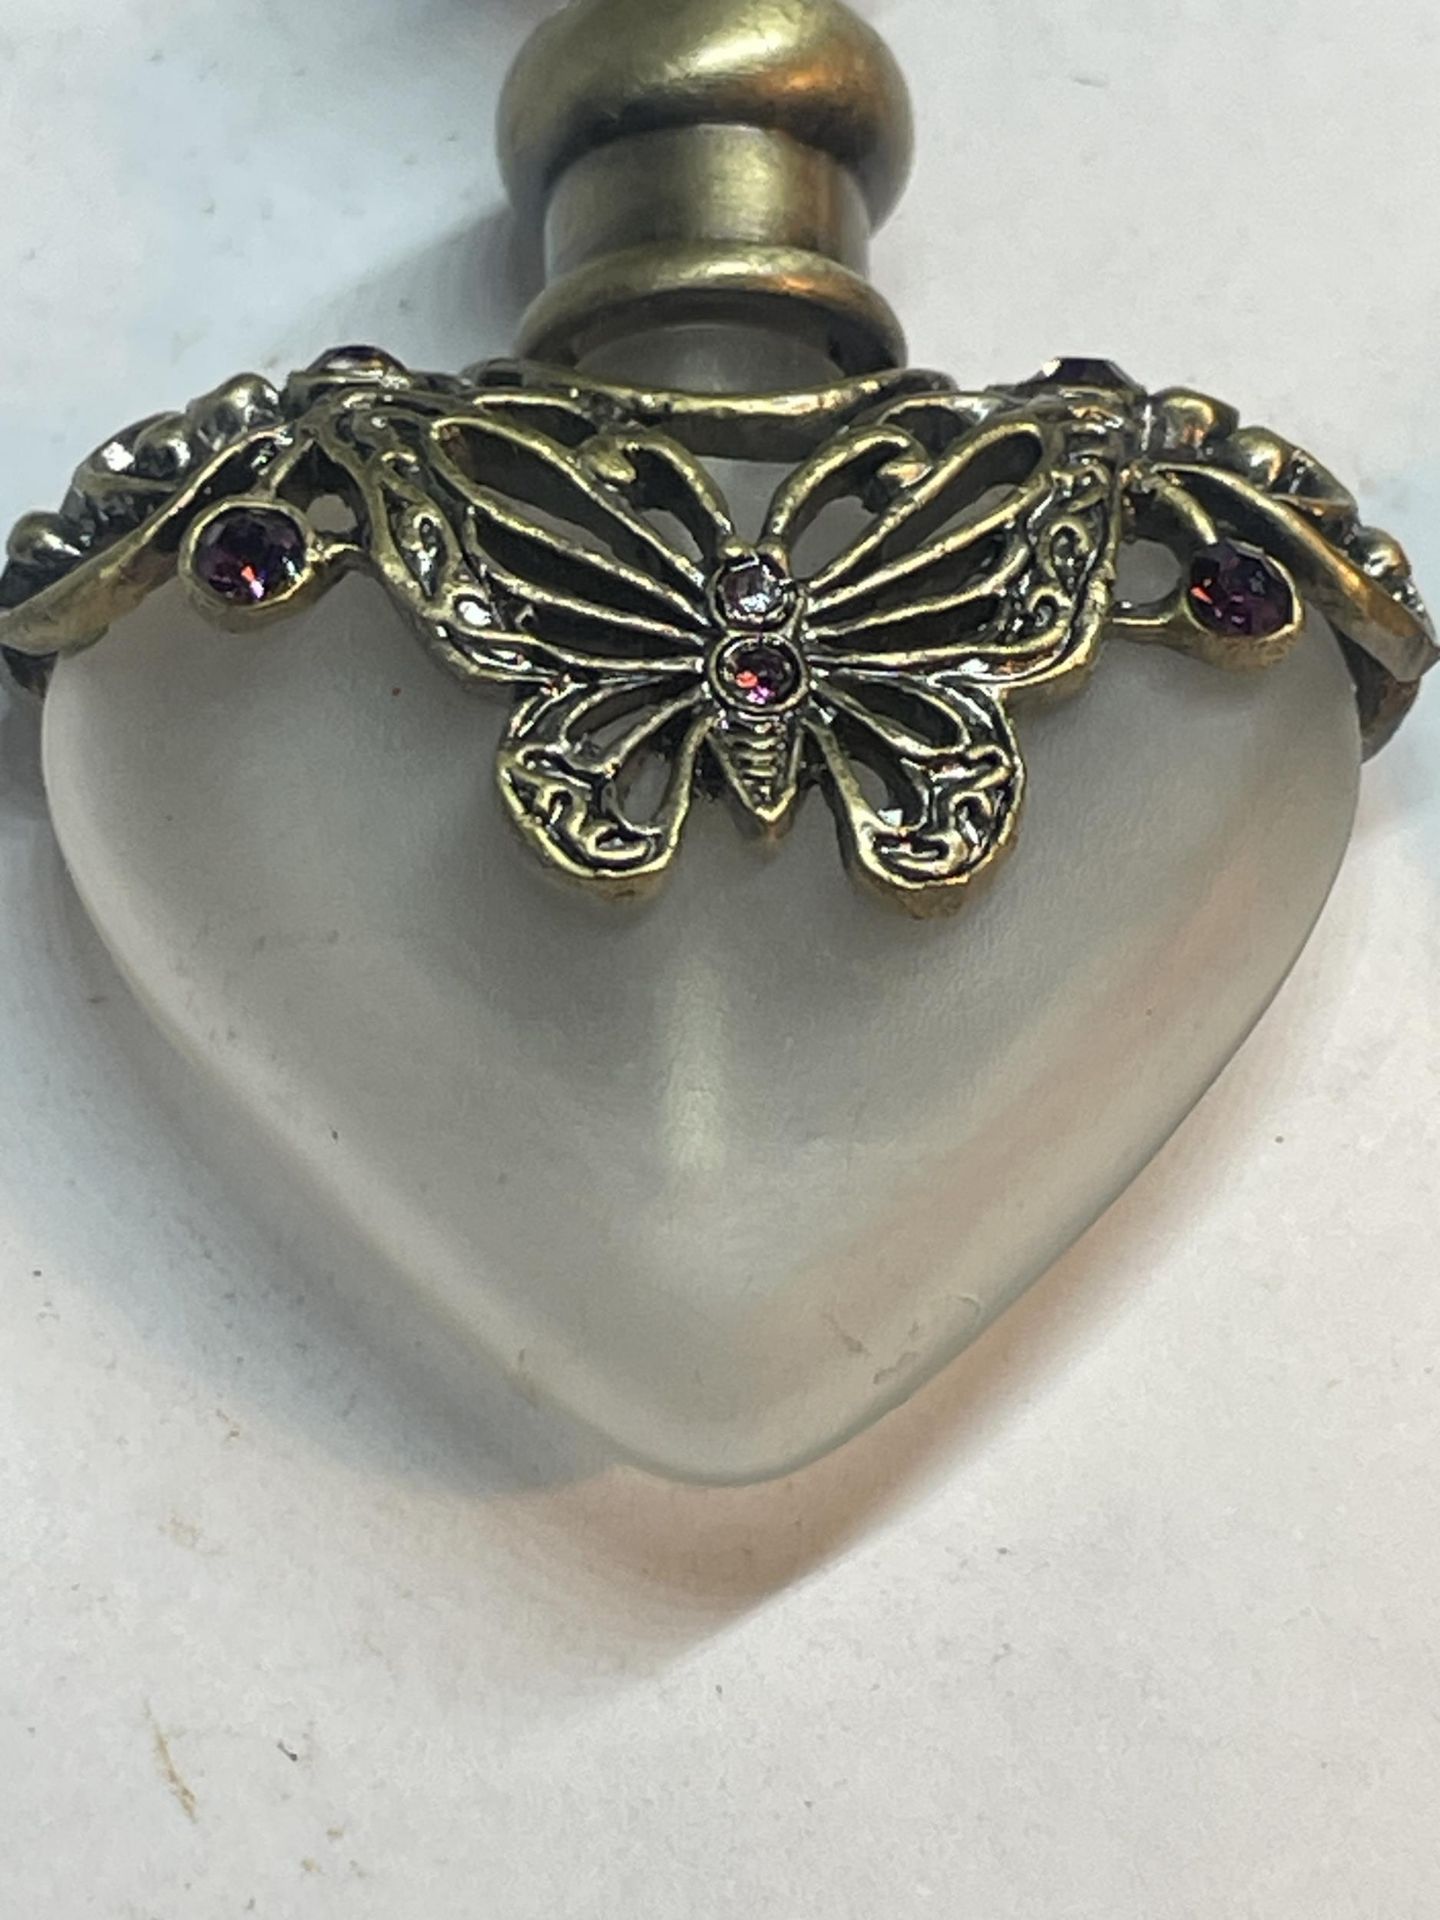 TWO GLASS PERFUME BOTTLES WITH METAL BUTTERFLY DESIGN - Image 2 of 4